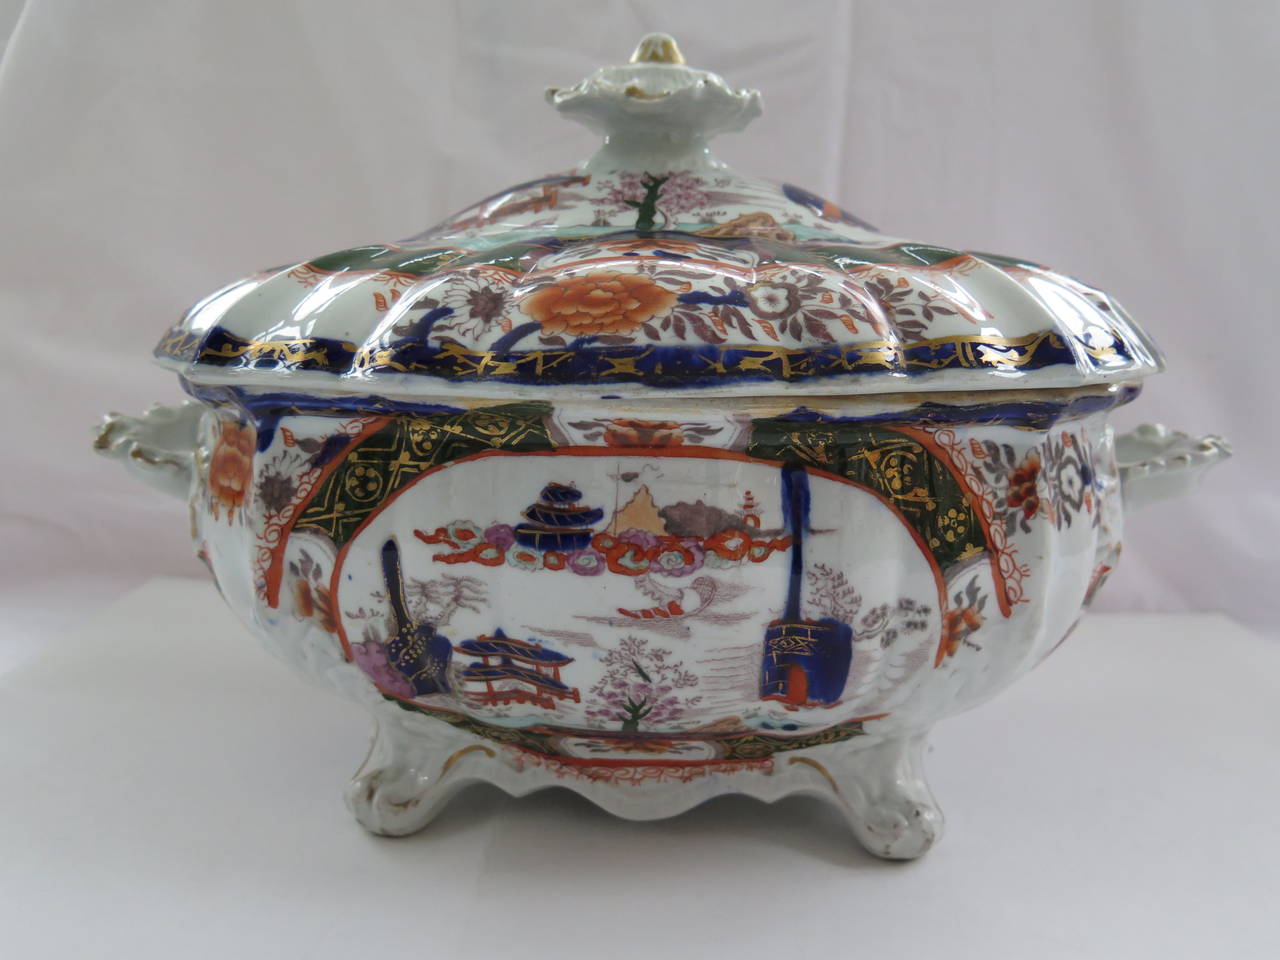 This is a superb large Ironstone TUREEN, complete with lid , made by Mason's of Lane Delph, Staffordshire, England, during the early part of the 19th Century.

The pattern is 